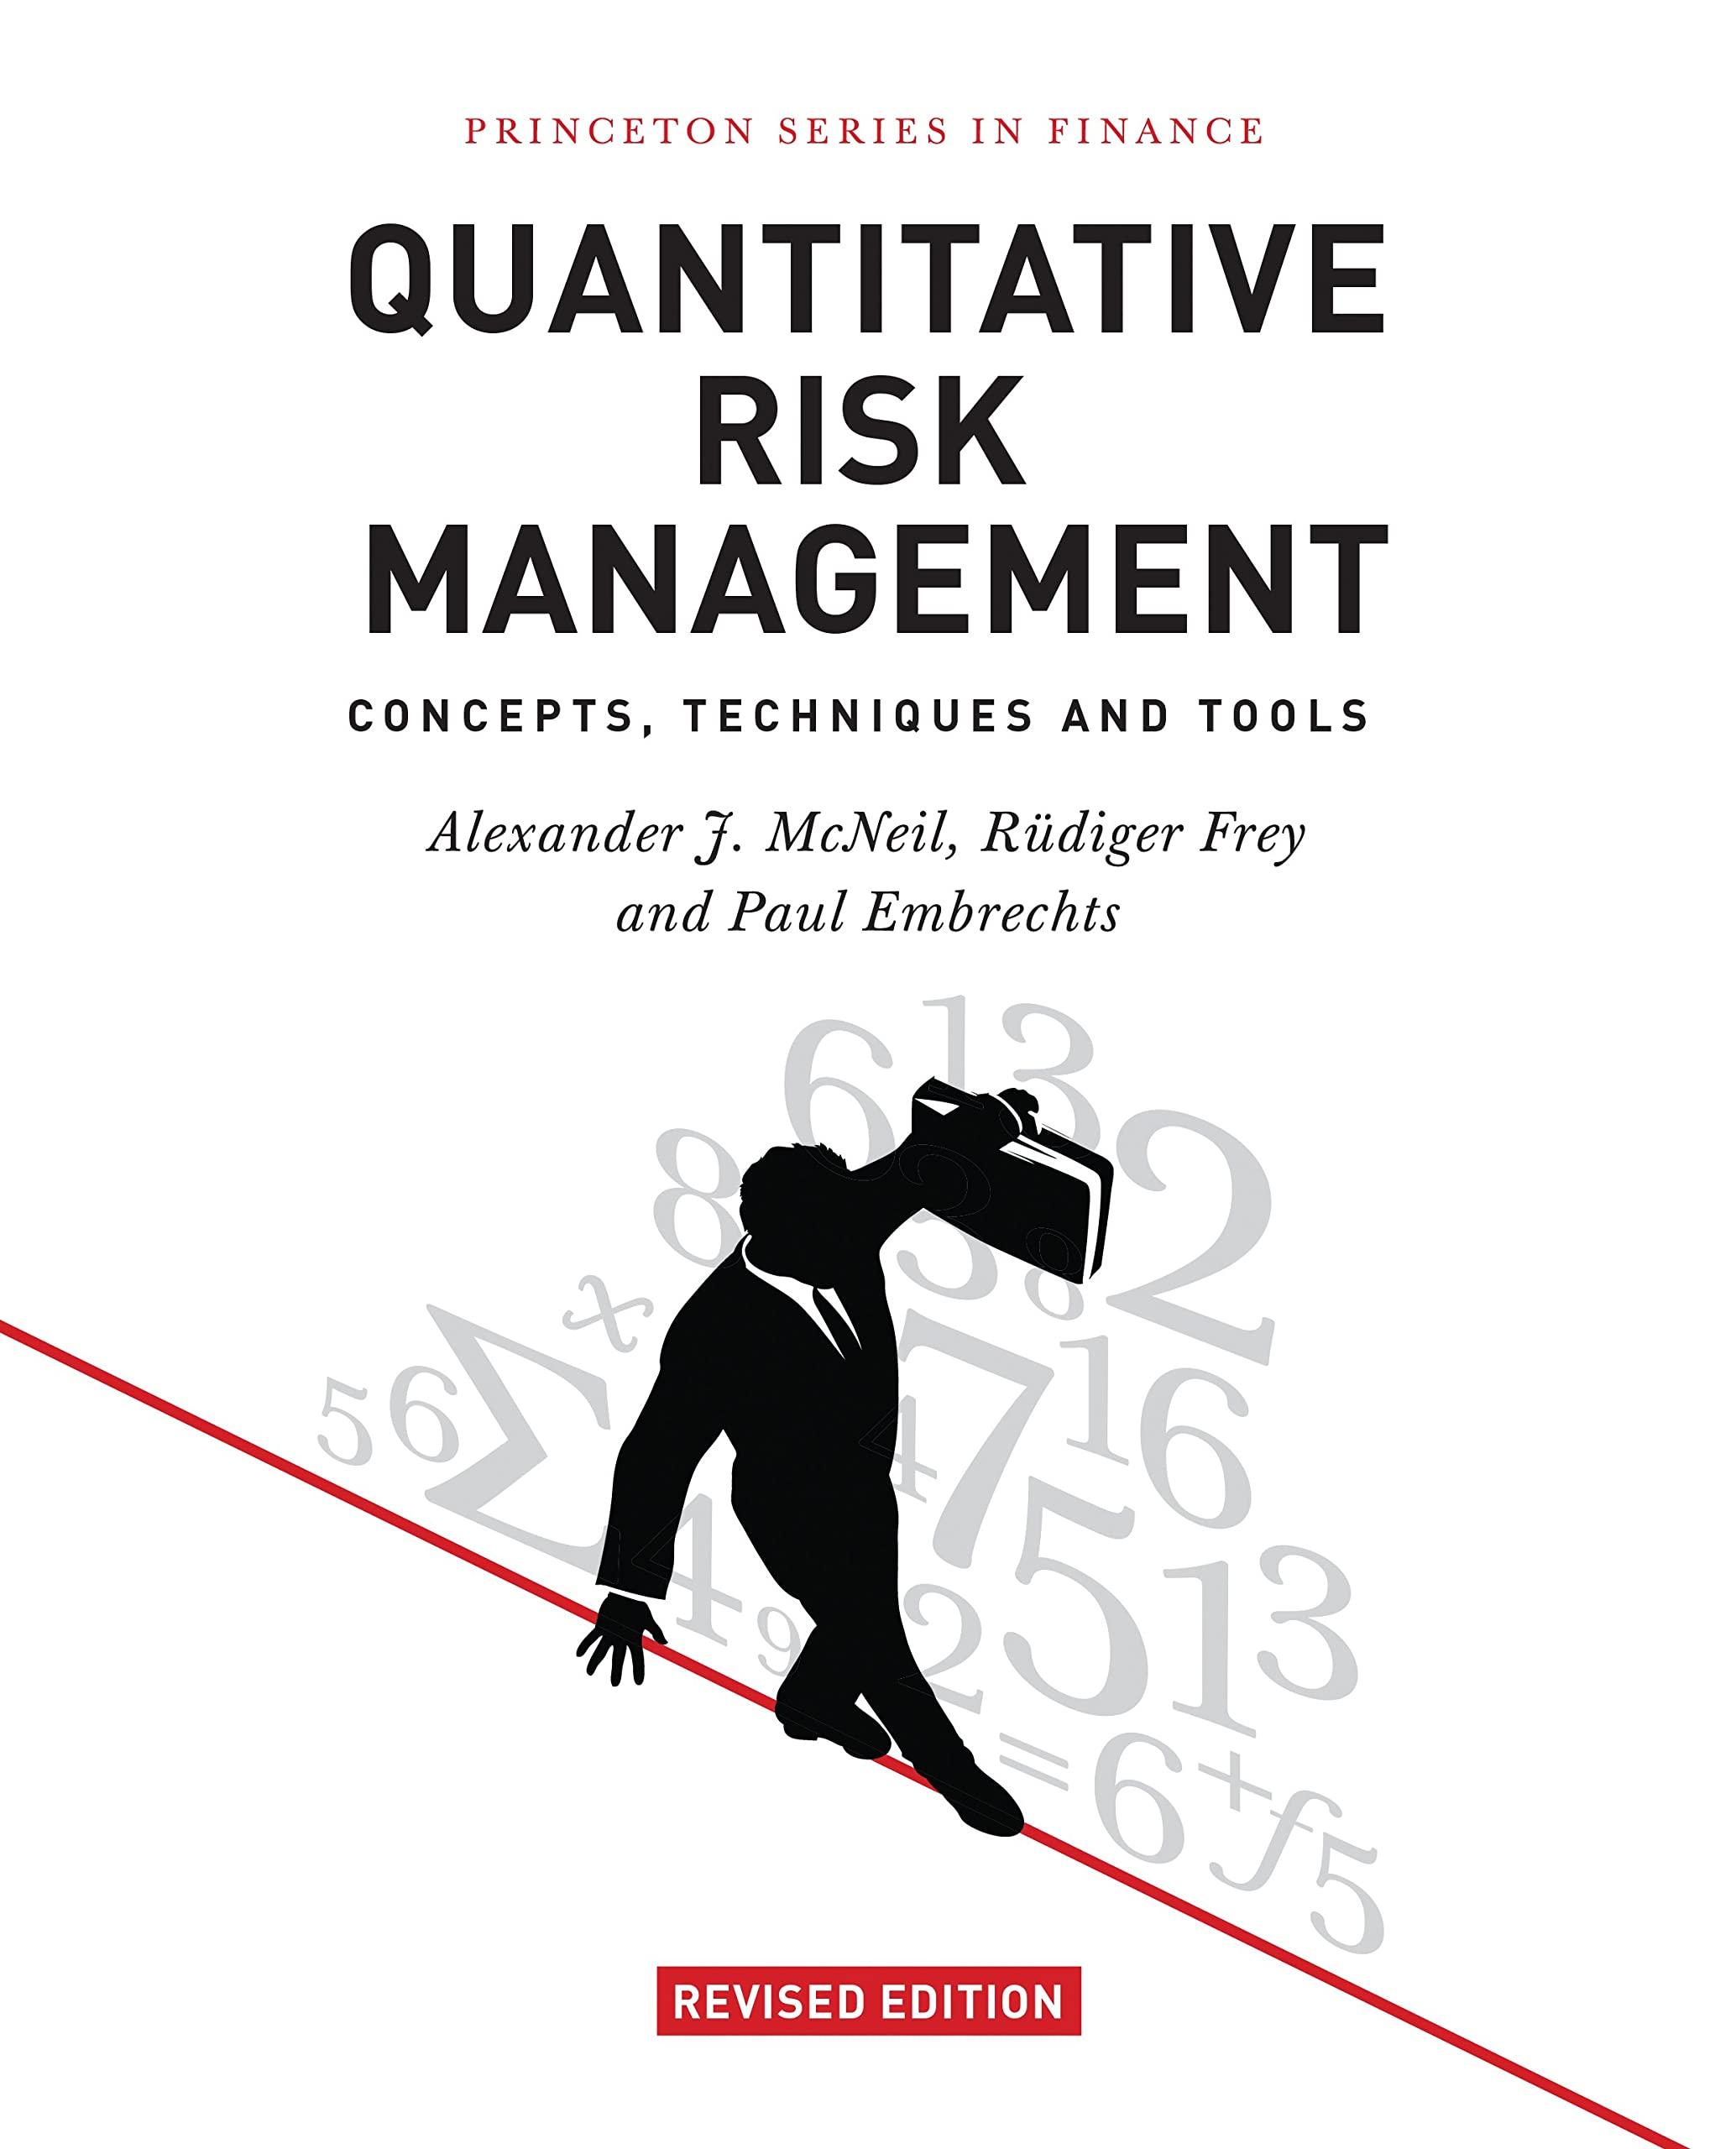 quantitative risk management concepts techniques and tools princeton series in finance) revised edition